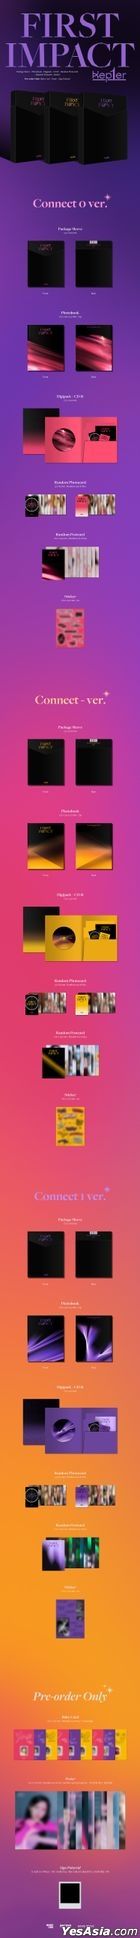 Kep1er Mini Album Vol. 1 - FIRST IMPACT (Connect 0 + Connect - + Connect 1 Version) + 3 Random Folded Posters